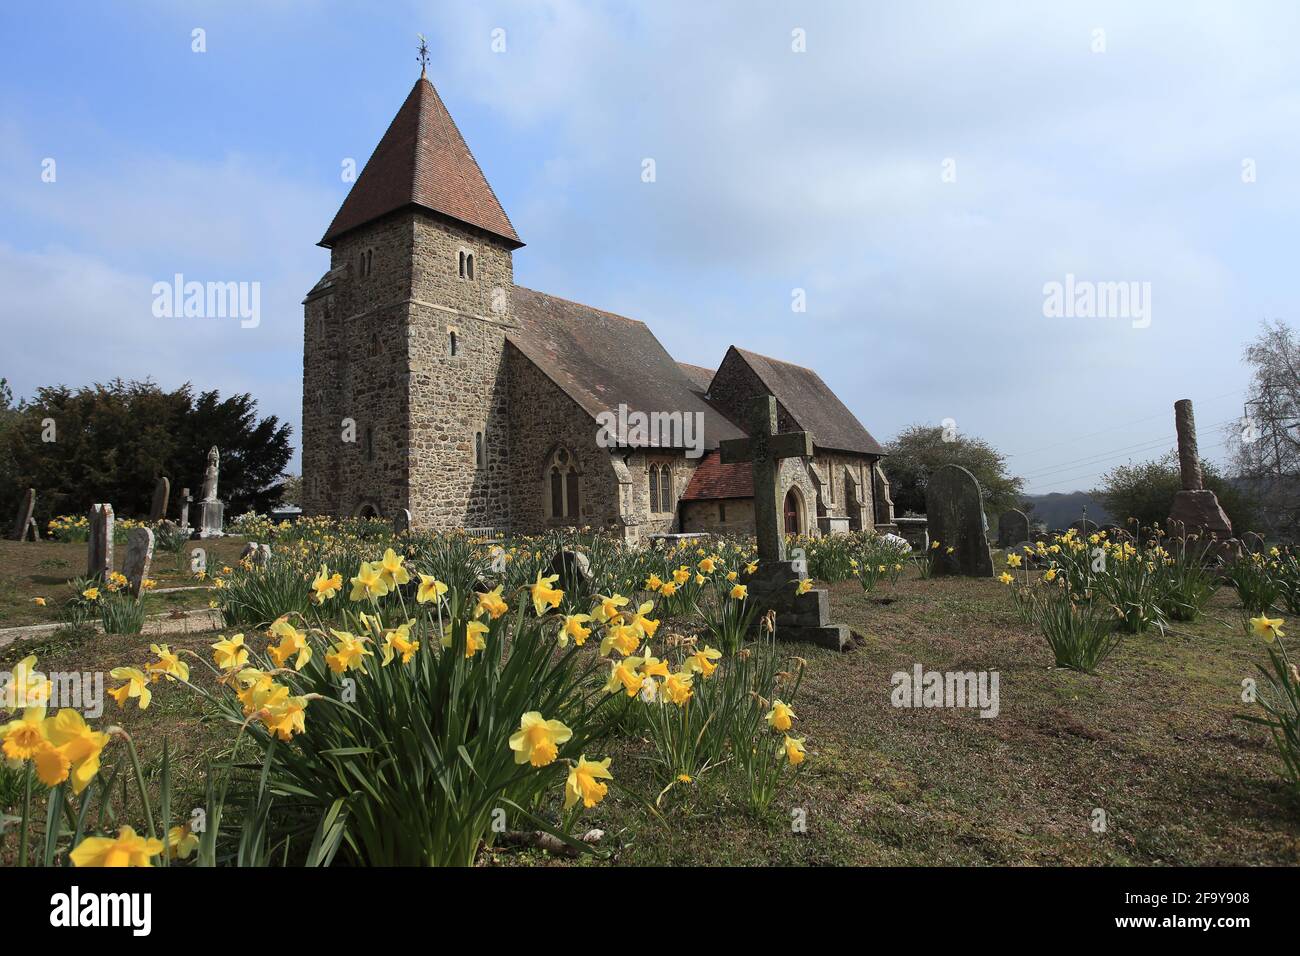 St Laurence's Church founded in Saxon Time and graveyard.  The current building still has its Norman tower, Gueslting, East Sussex, UK Stock Photo